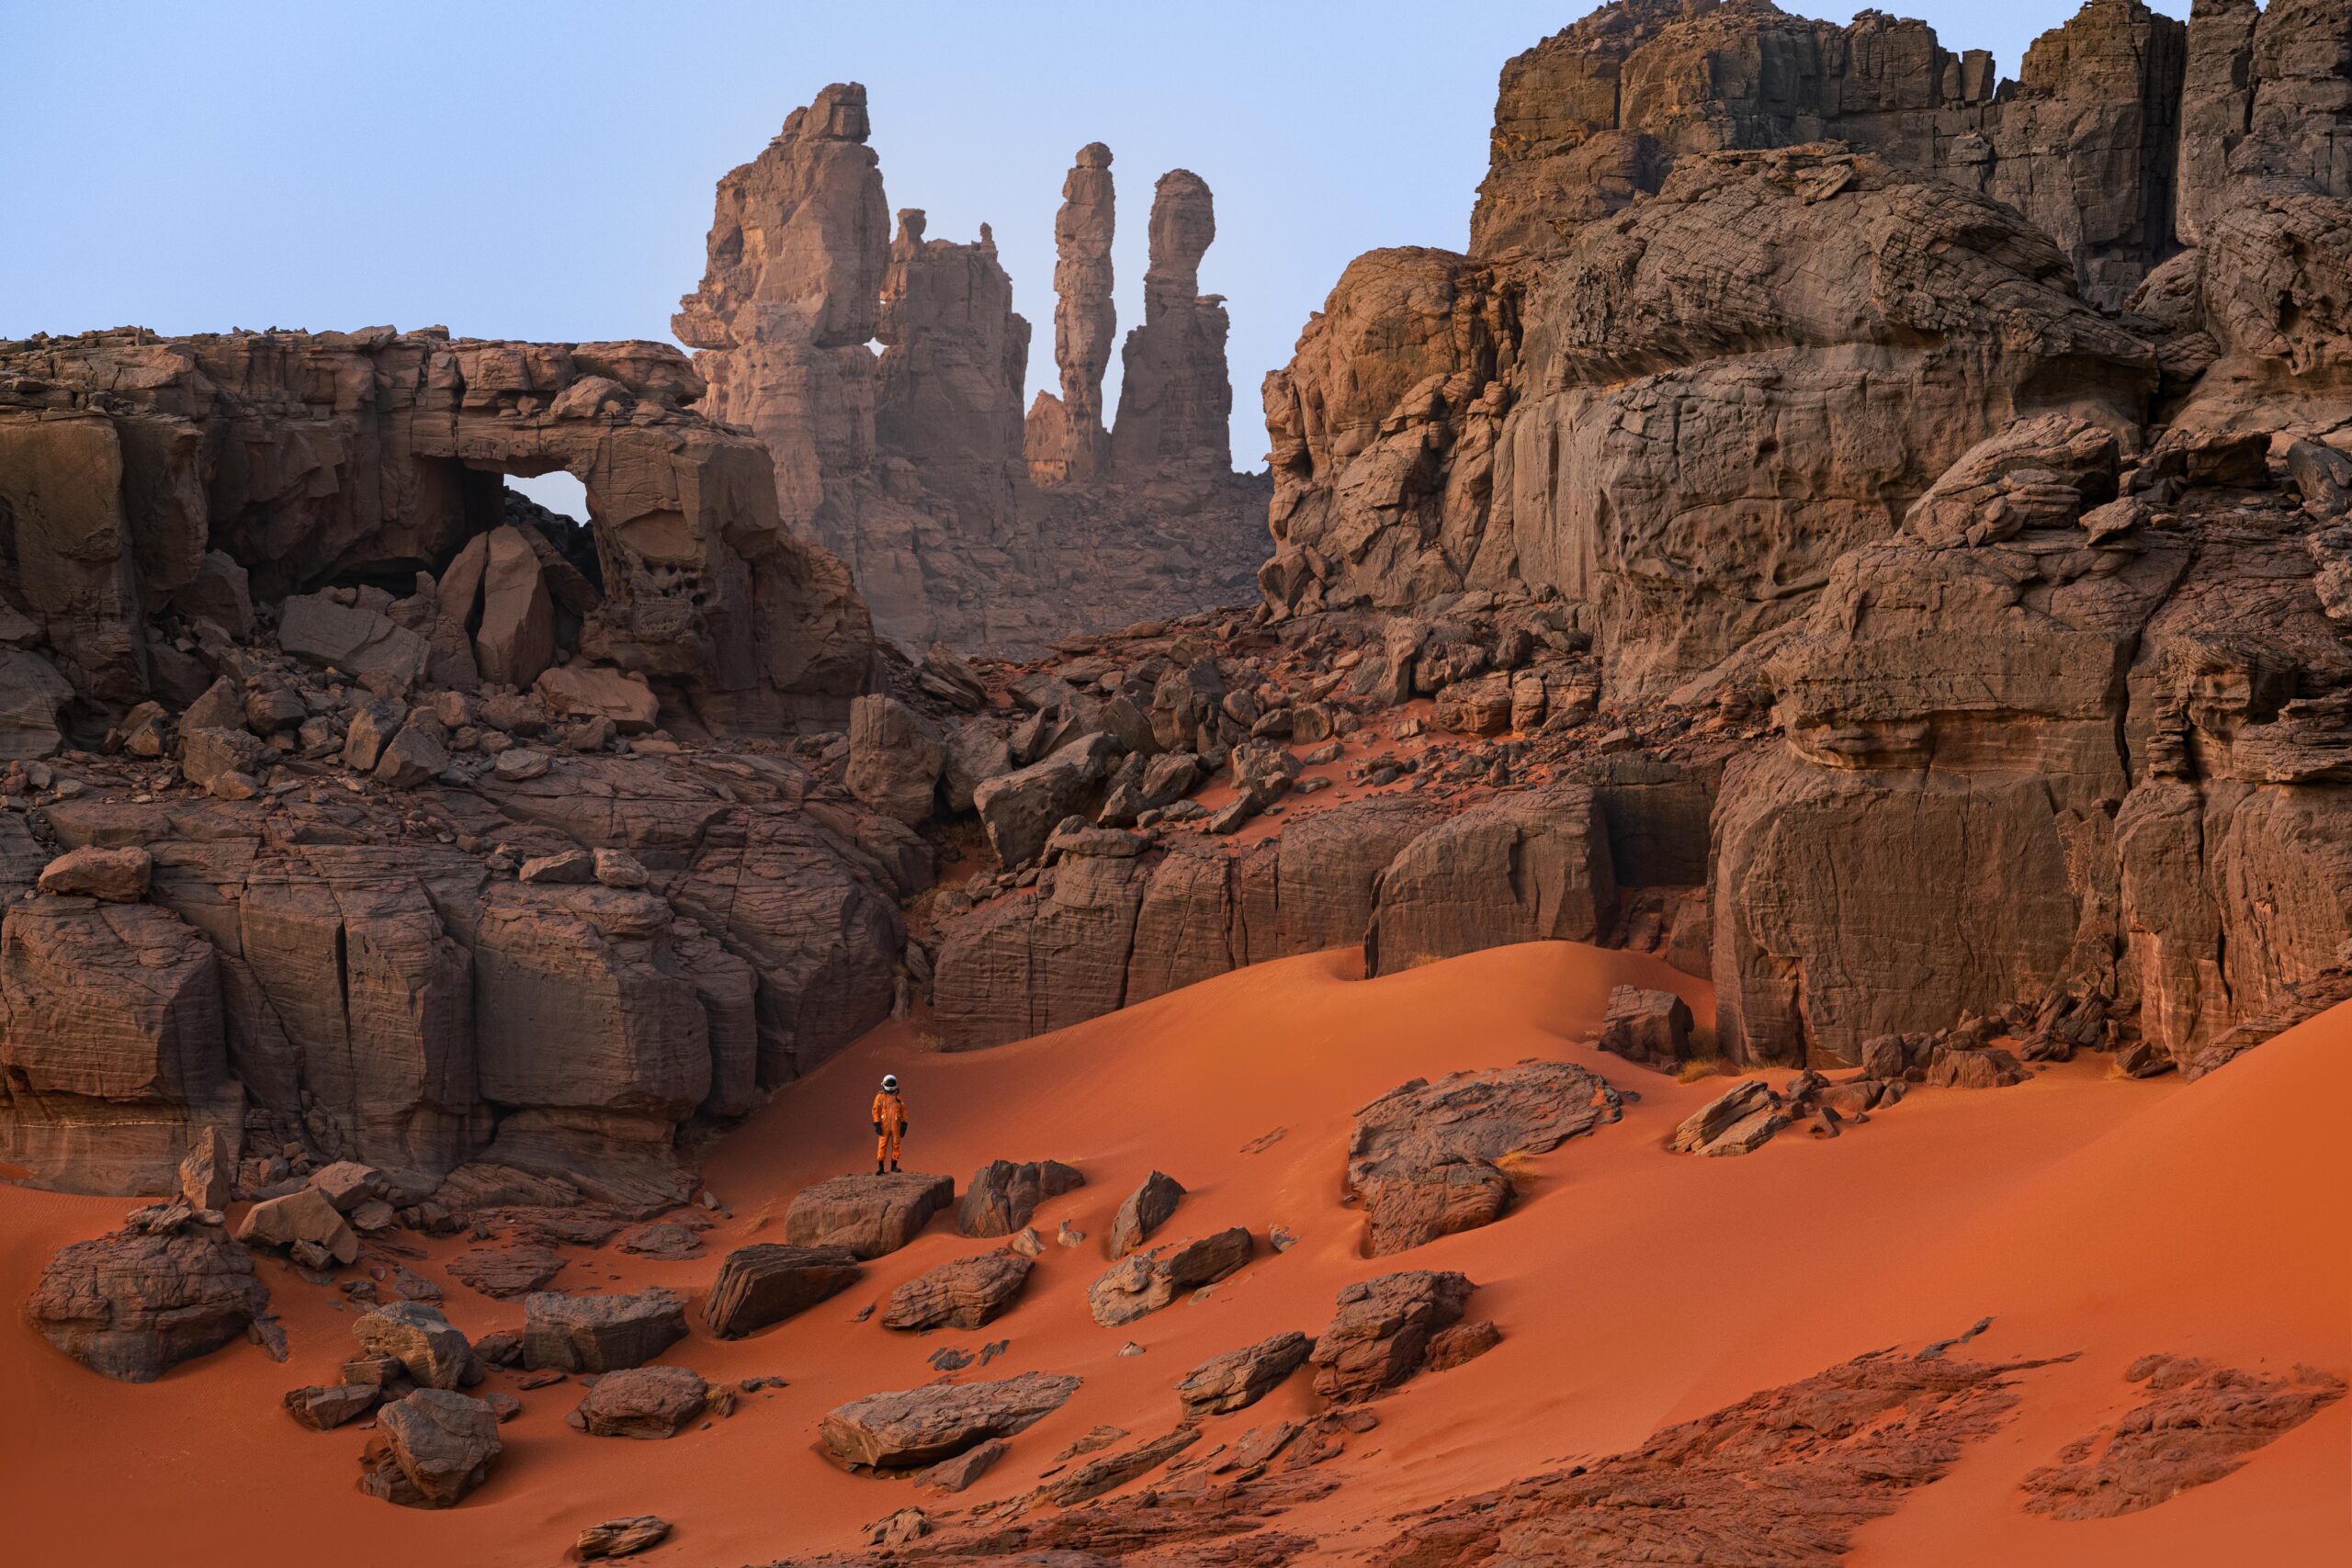 The Mars-like landscape of North Africa's Tassili N' Ajjer National Park. Photograph of an astronaut.